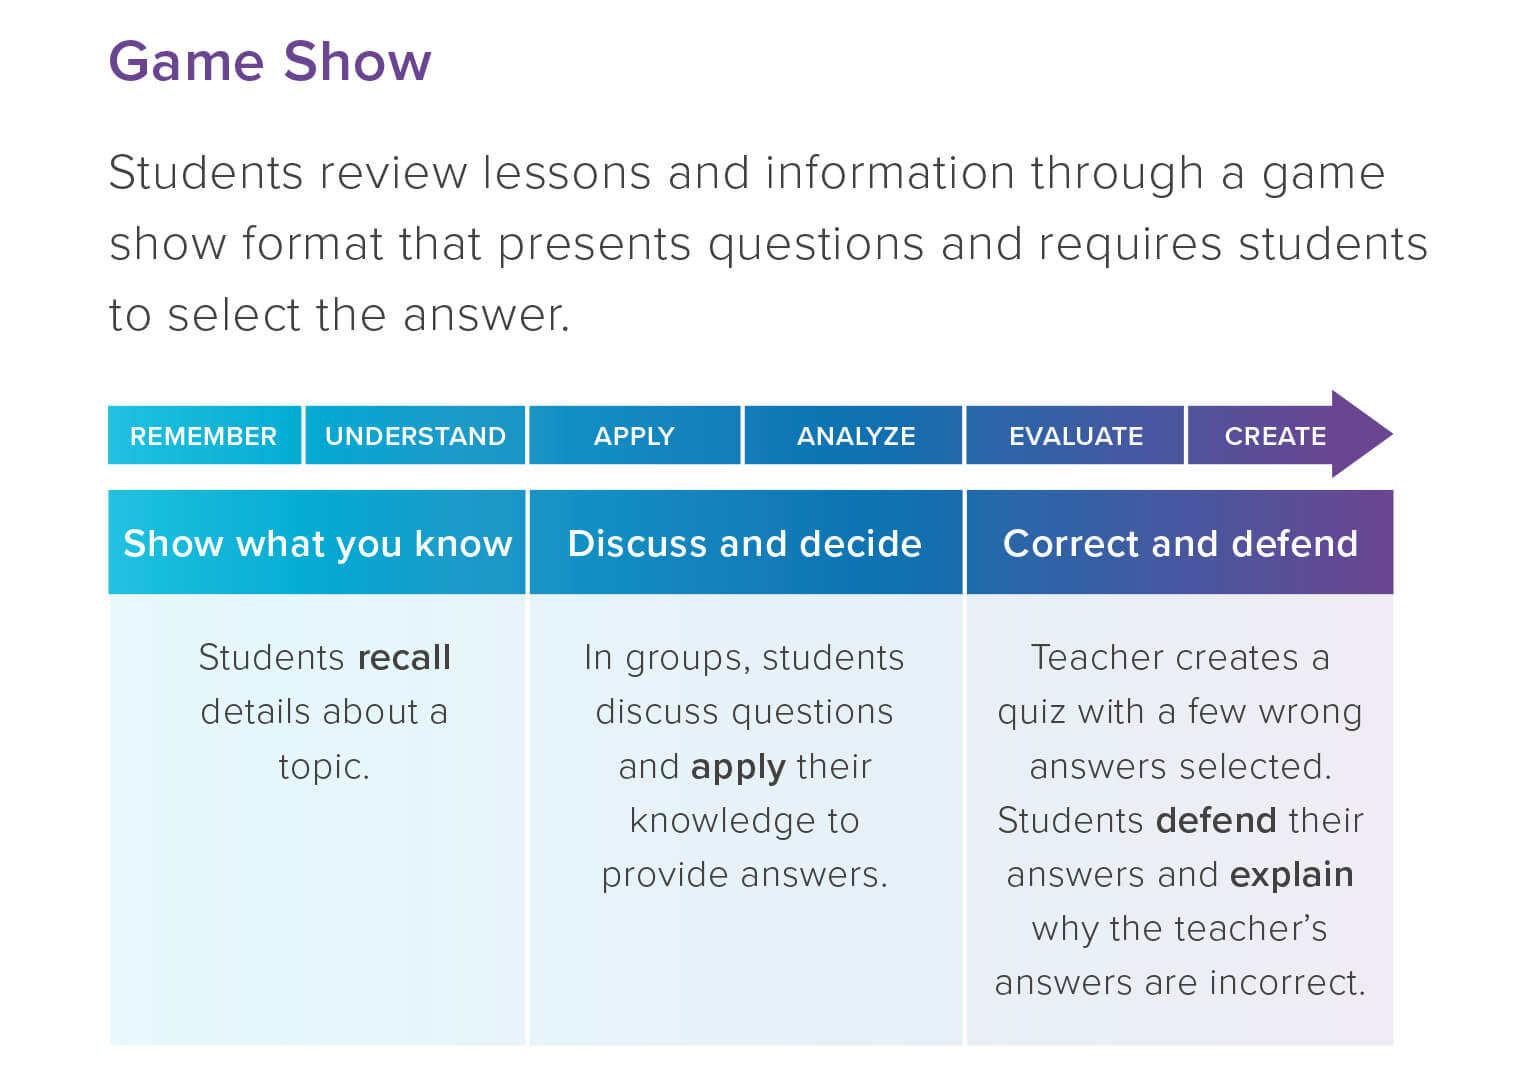 Image showcasing gamification in the classroom through a game show activity.